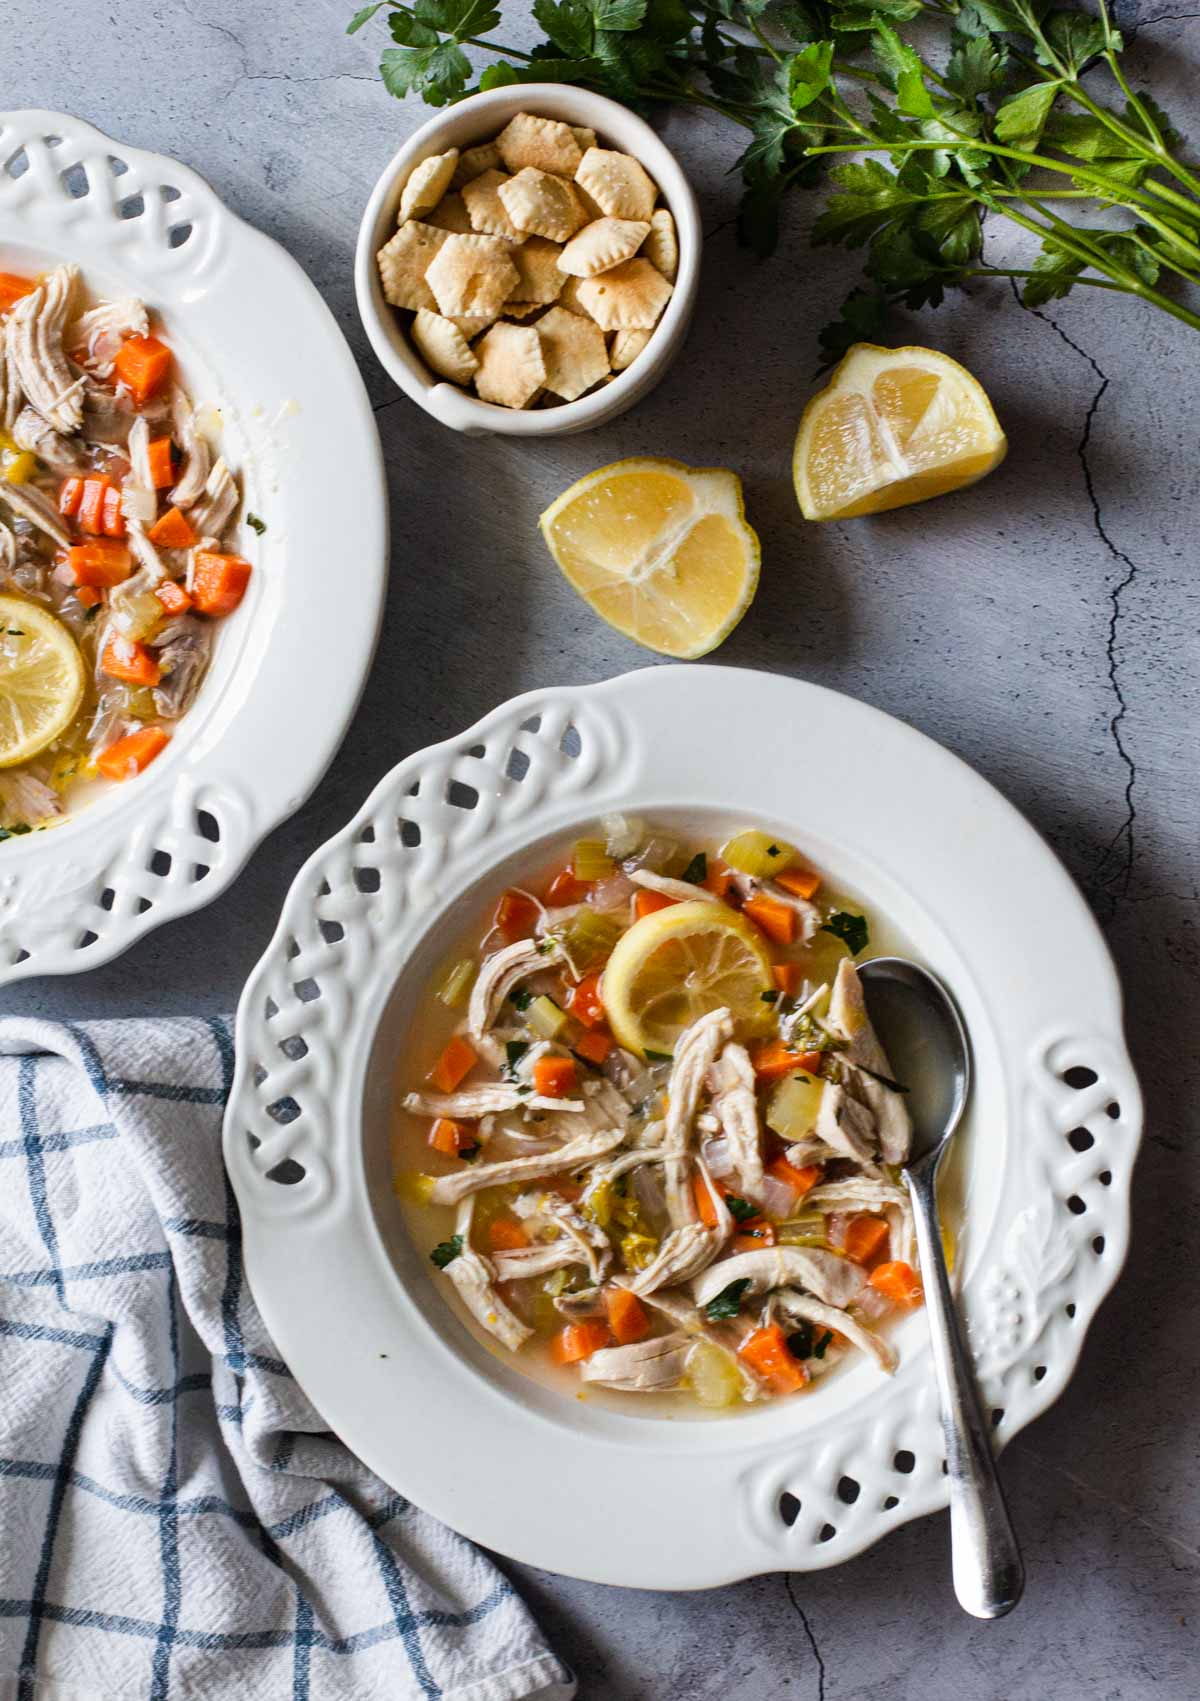 Lemon ginger chicken soup with a bowl of oyster crackers.